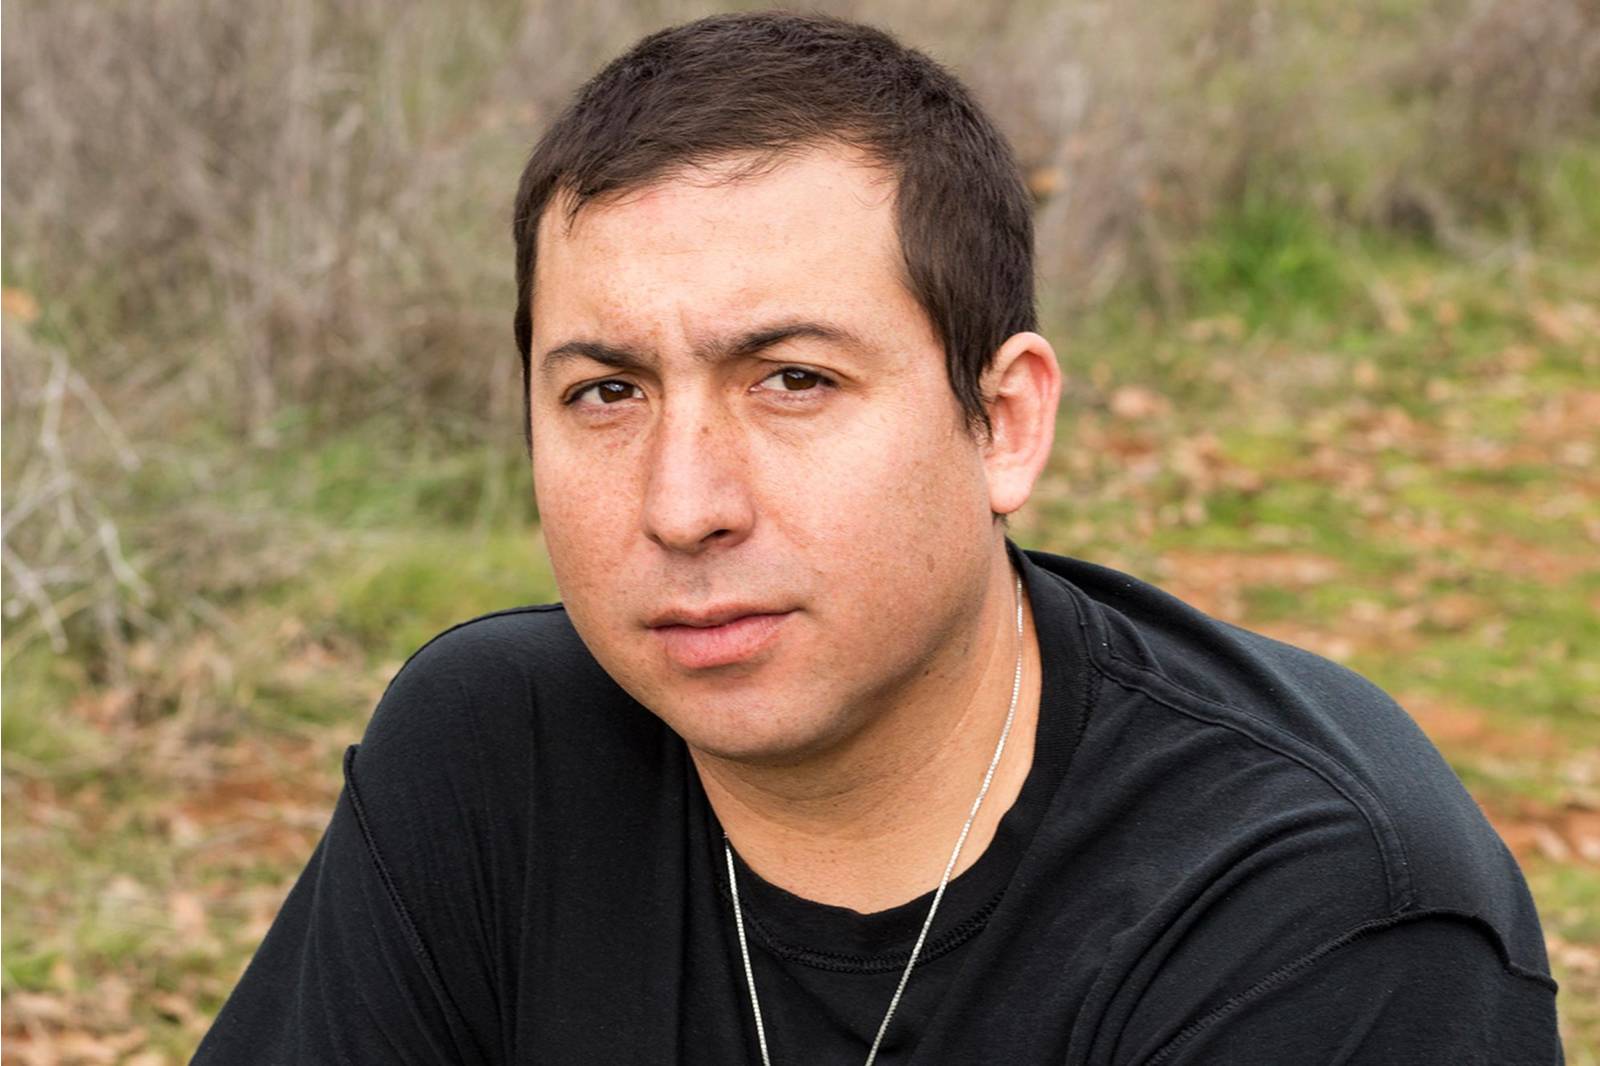 Cheyenne-Arapaho author lands on shortlist for first novel 'There, There'